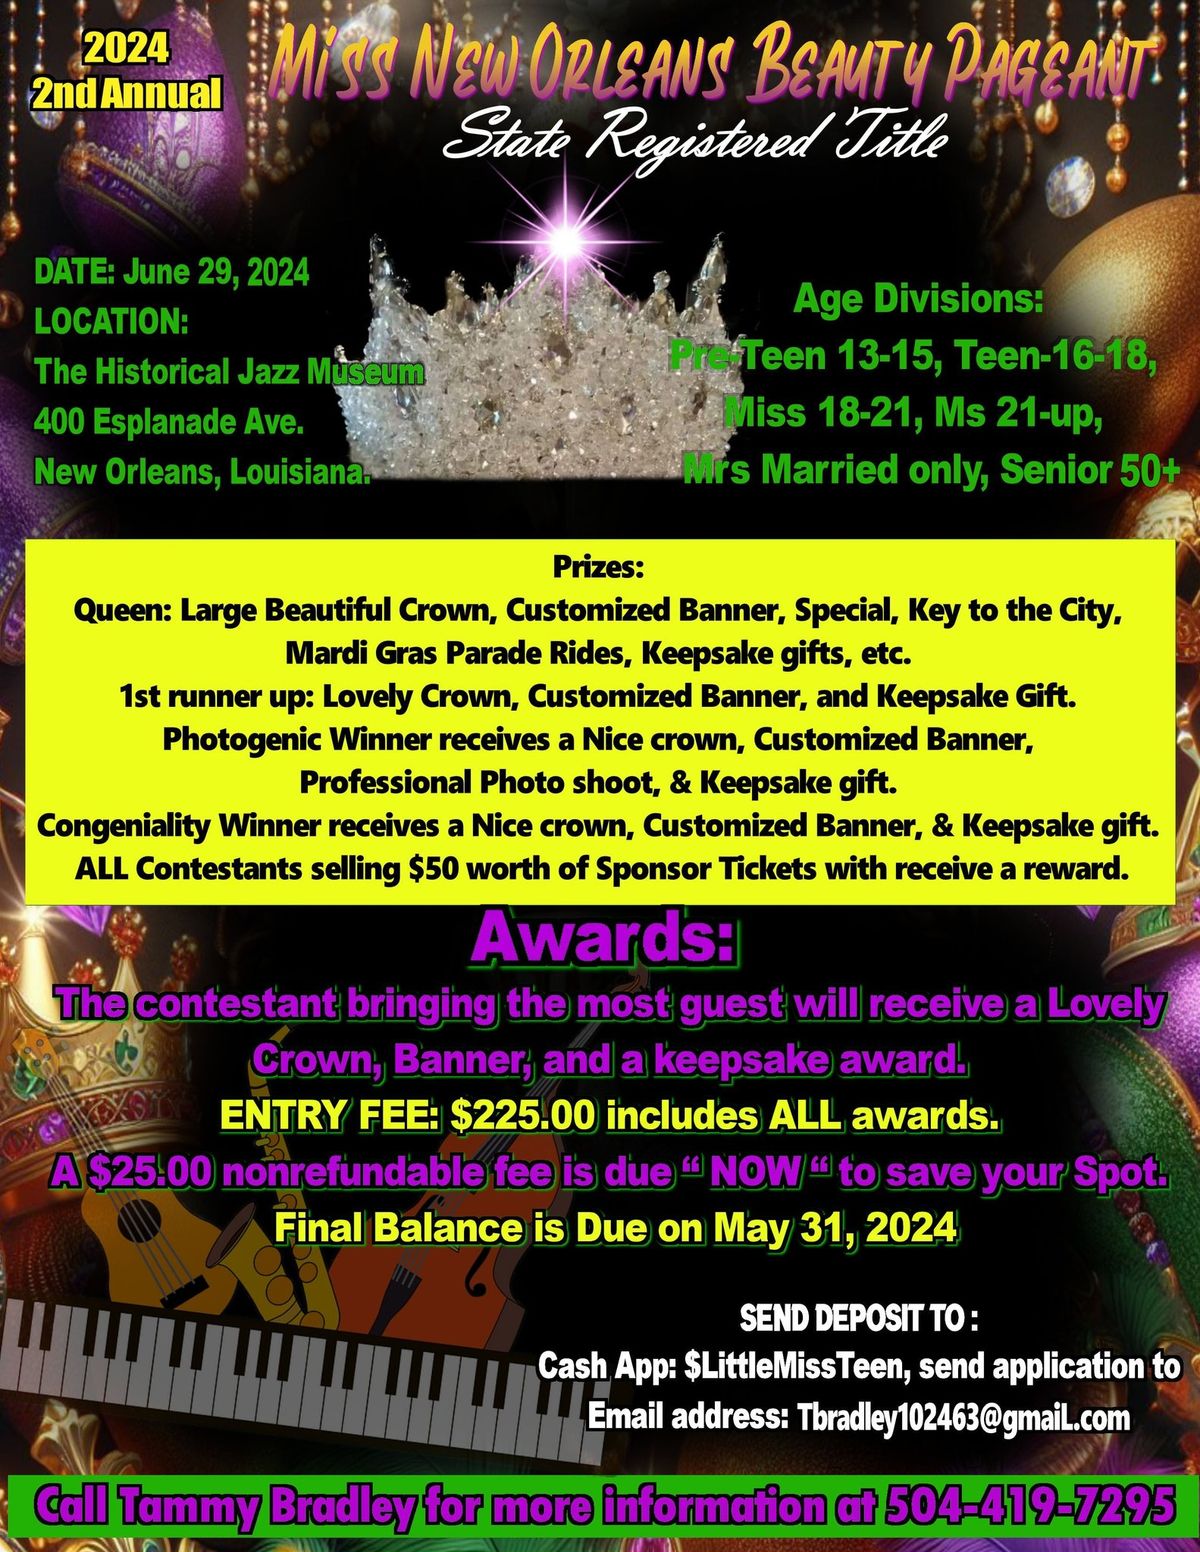 2nd Annual Miss New Orleans Beauty Pageant